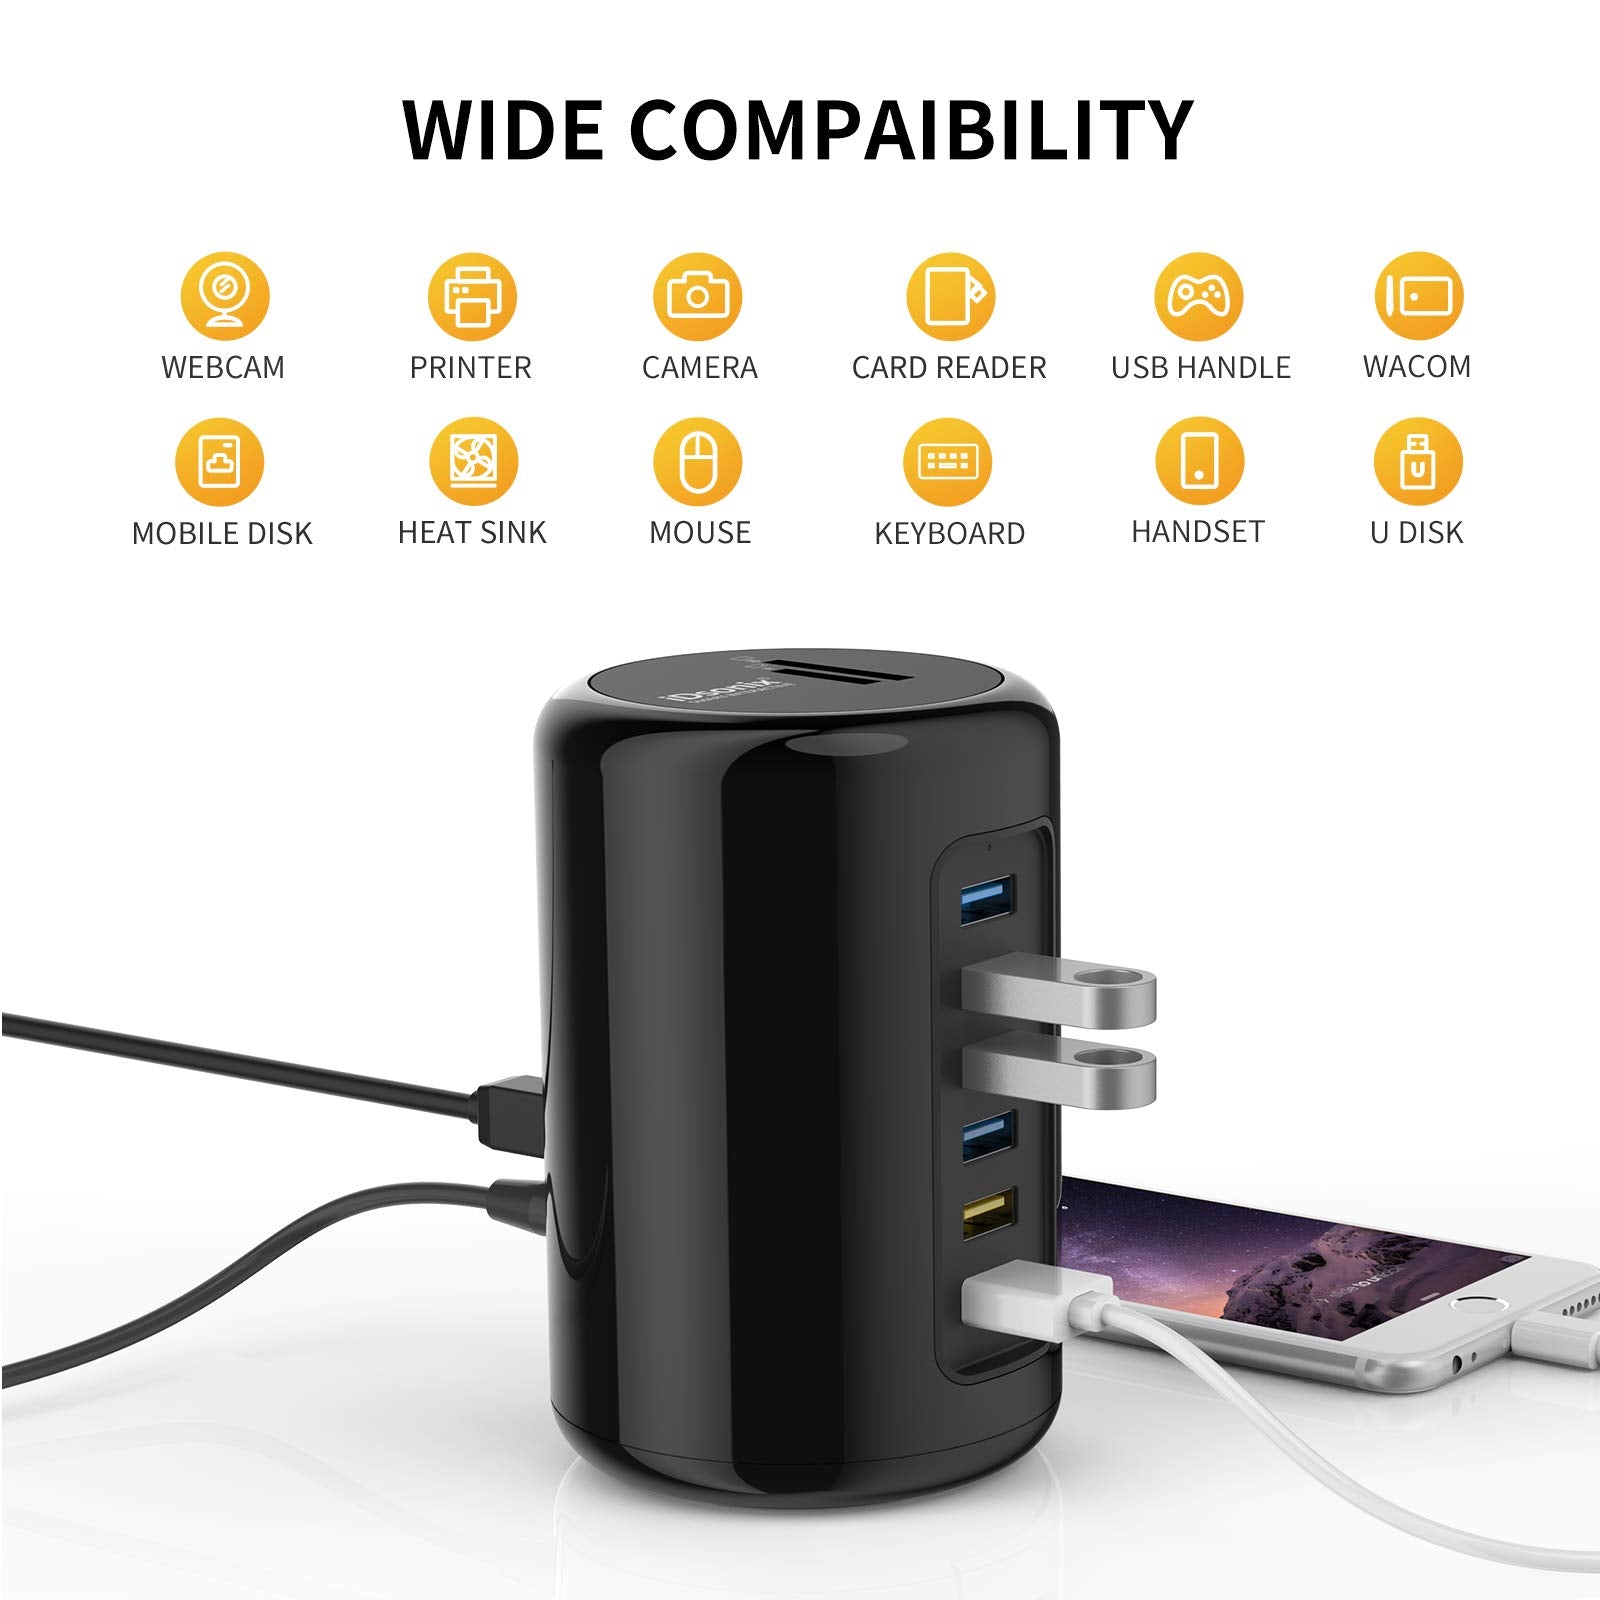 iDsonix USB 3.0 Hub, 12V/3A Powered Station 8 in 1 USB Charger Hub with 5V/2.4A BC1.2 Charging ports 5Gbps HighSpeed Data Transfer Ports and SD&TF Card Reader Combo for Laptop, Tablets,PC,and More